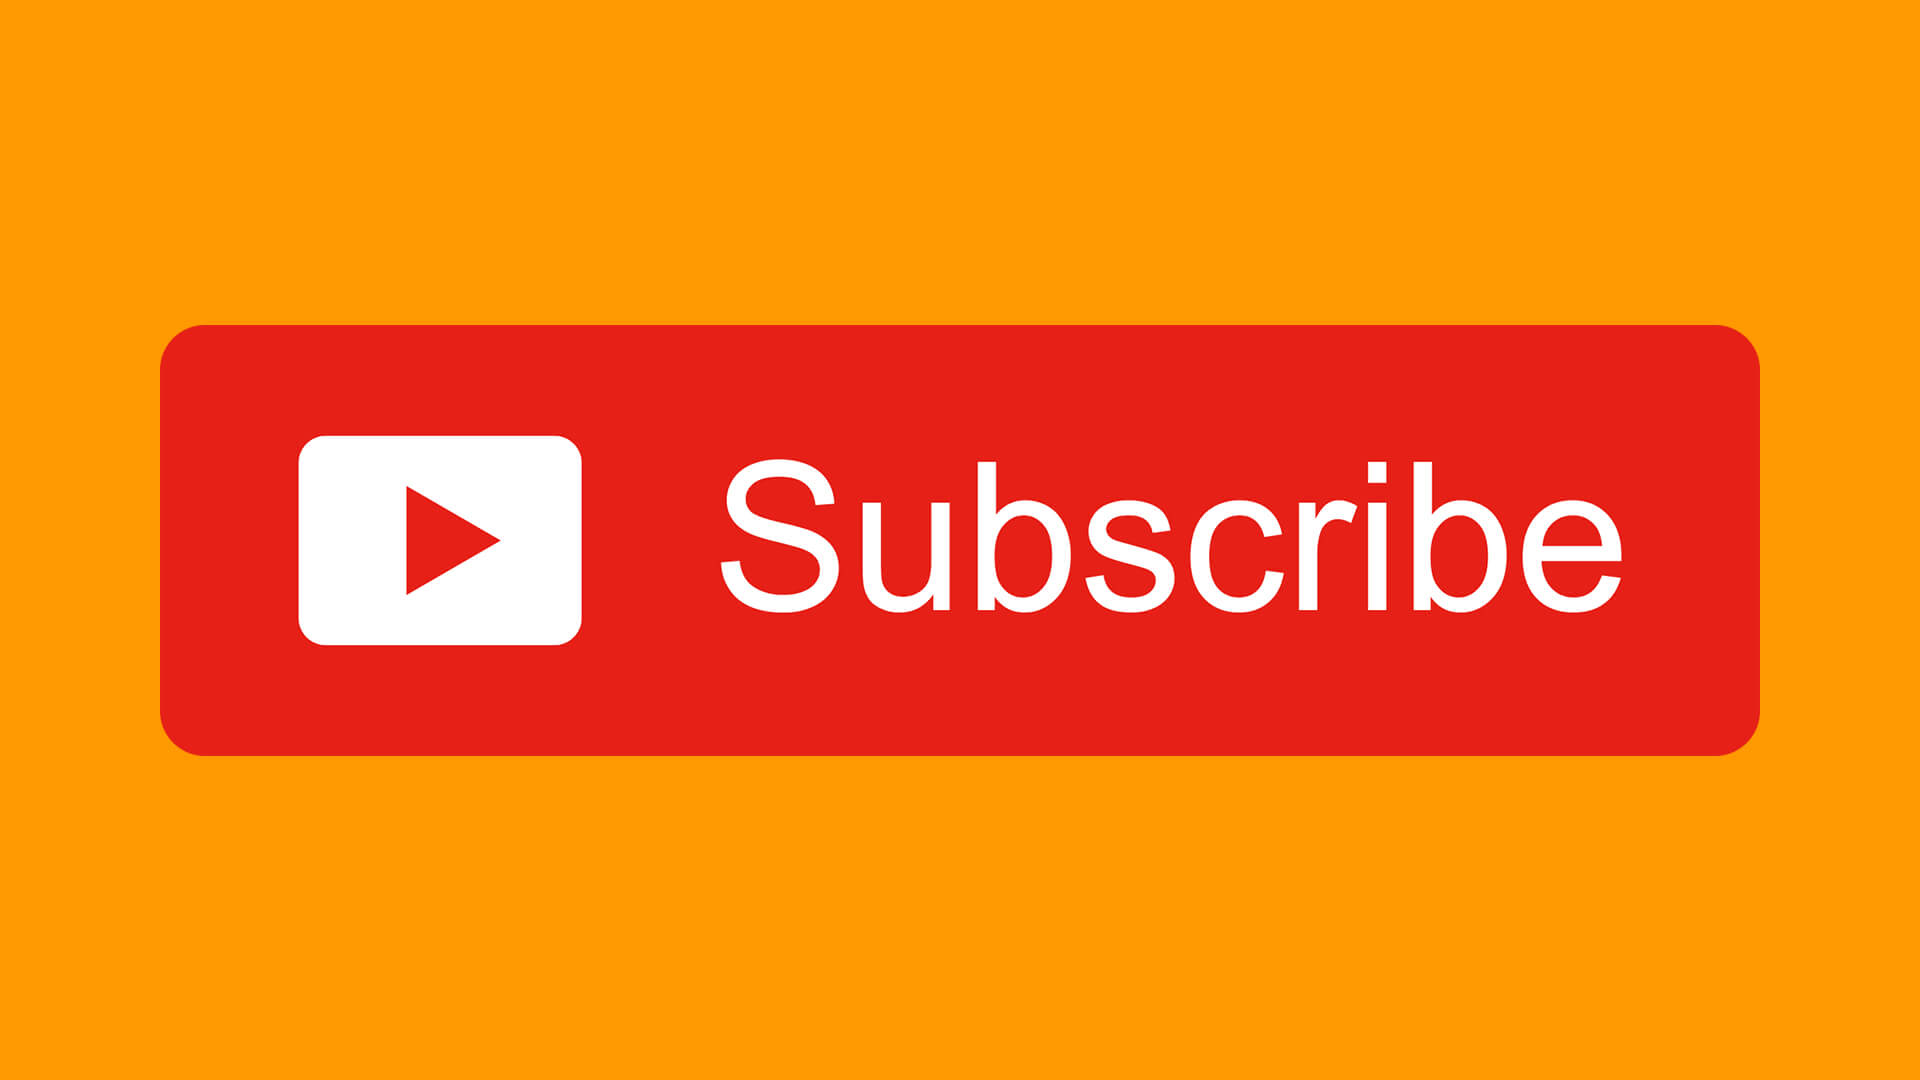 Free-YouTube-Subscribe-Button-Download-Design-Inspiration-By-AlfredoCreates-5